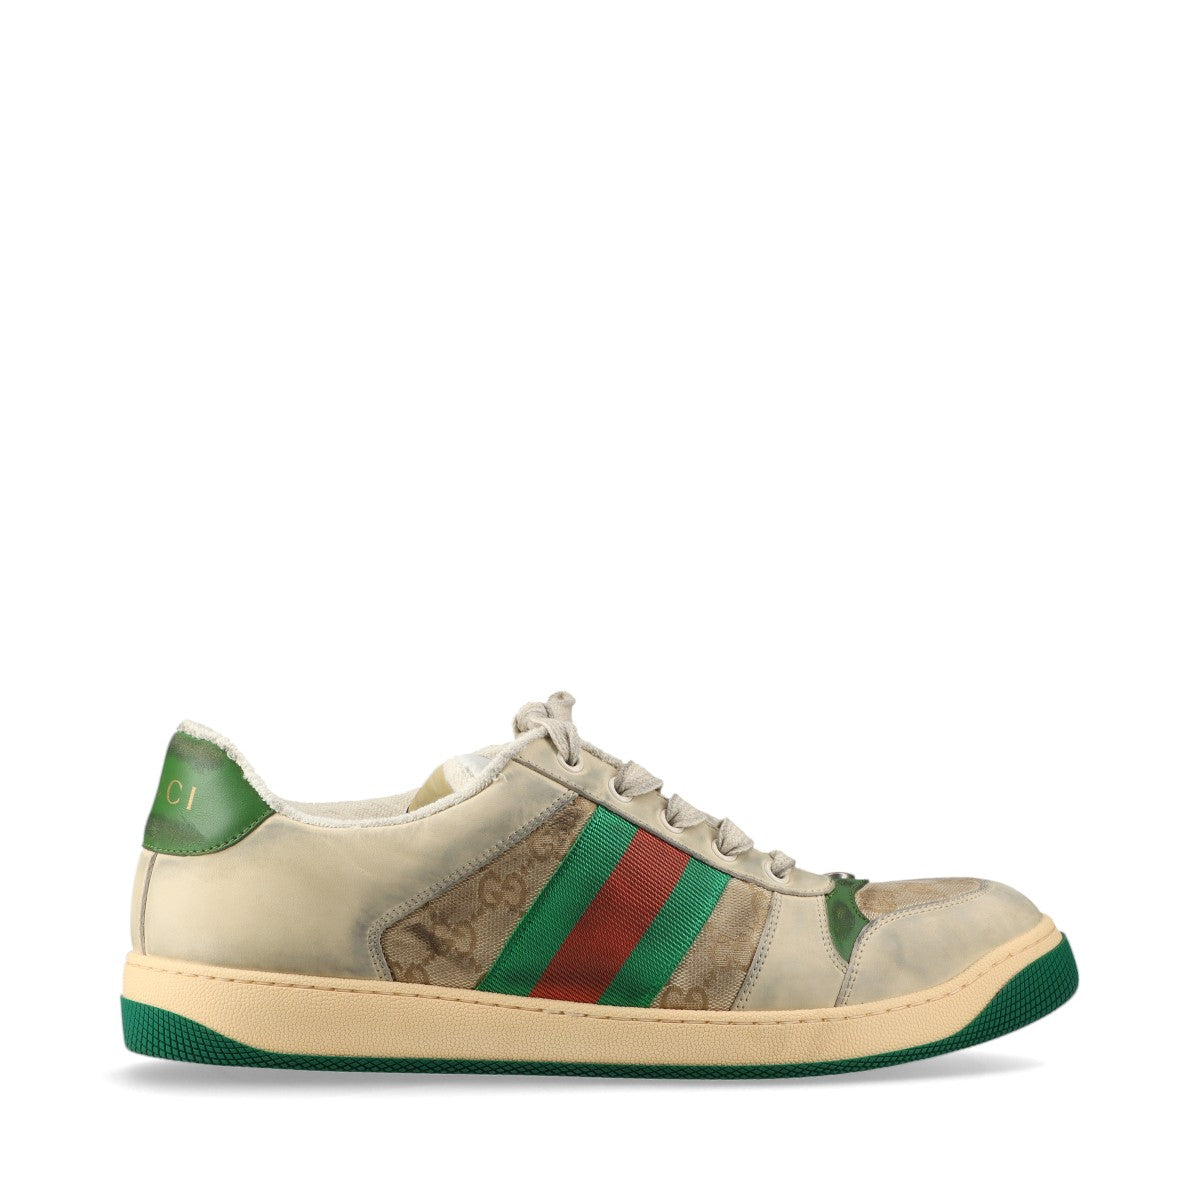 Gucci Screener Canvas & leather Sneakers 11 Men's Multicolor Vintage processing GG Supreme Sherry Line